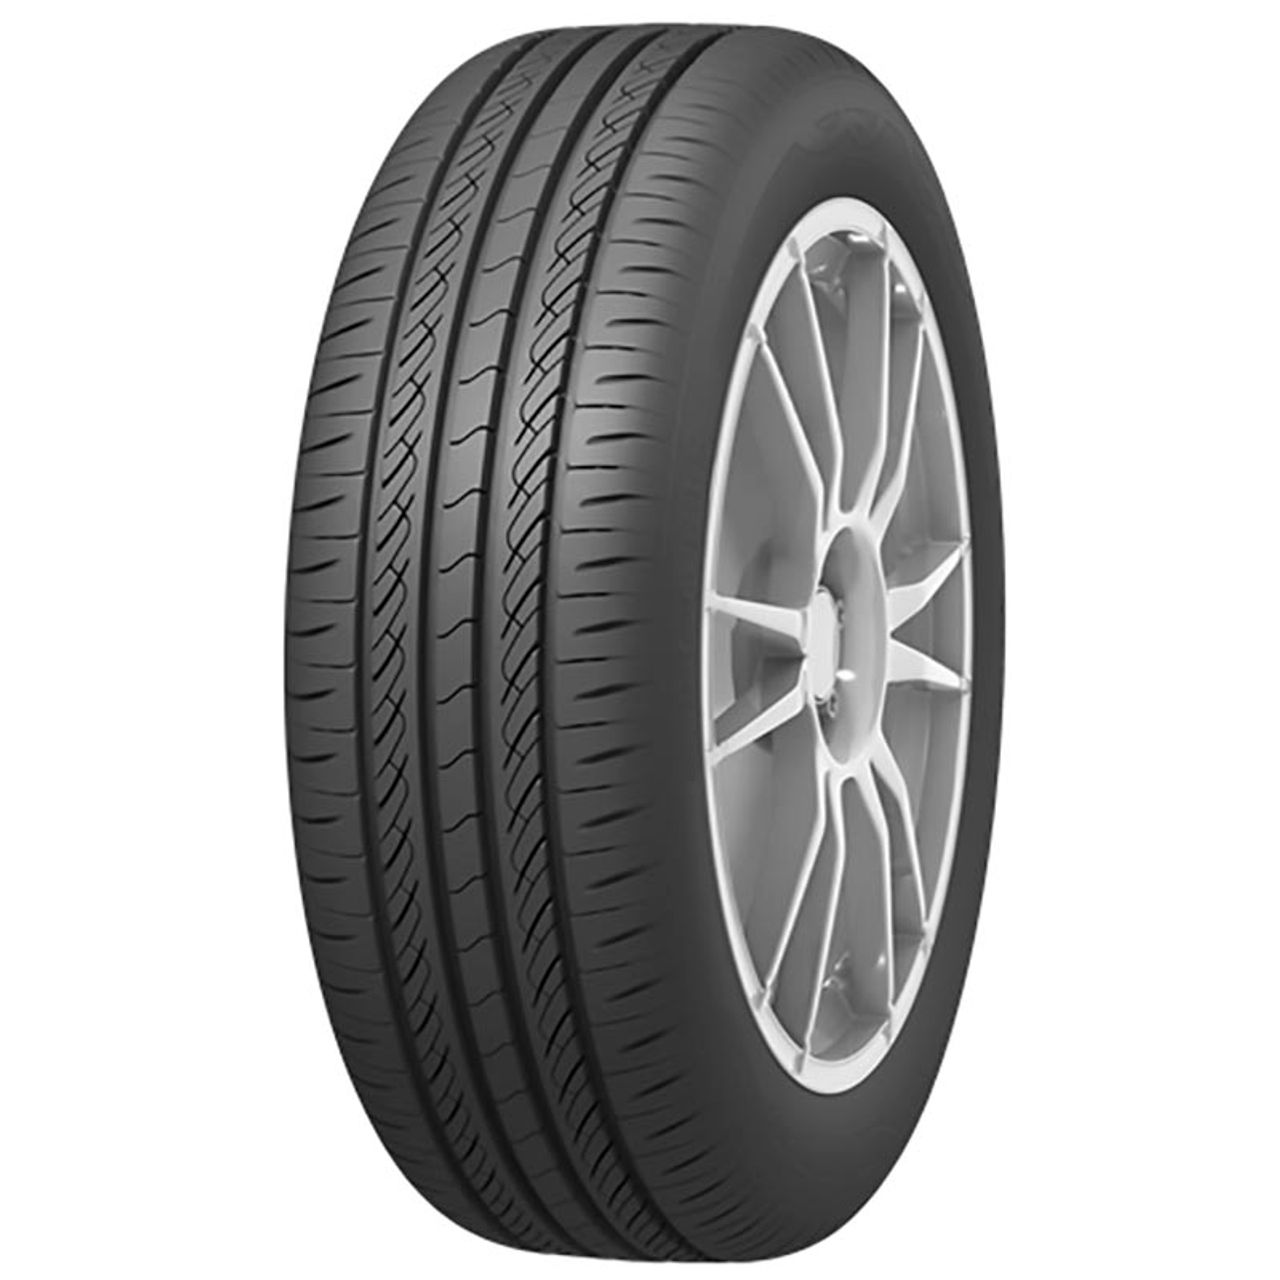 INFINITY ECOSIS 205/60R15 91V BSW